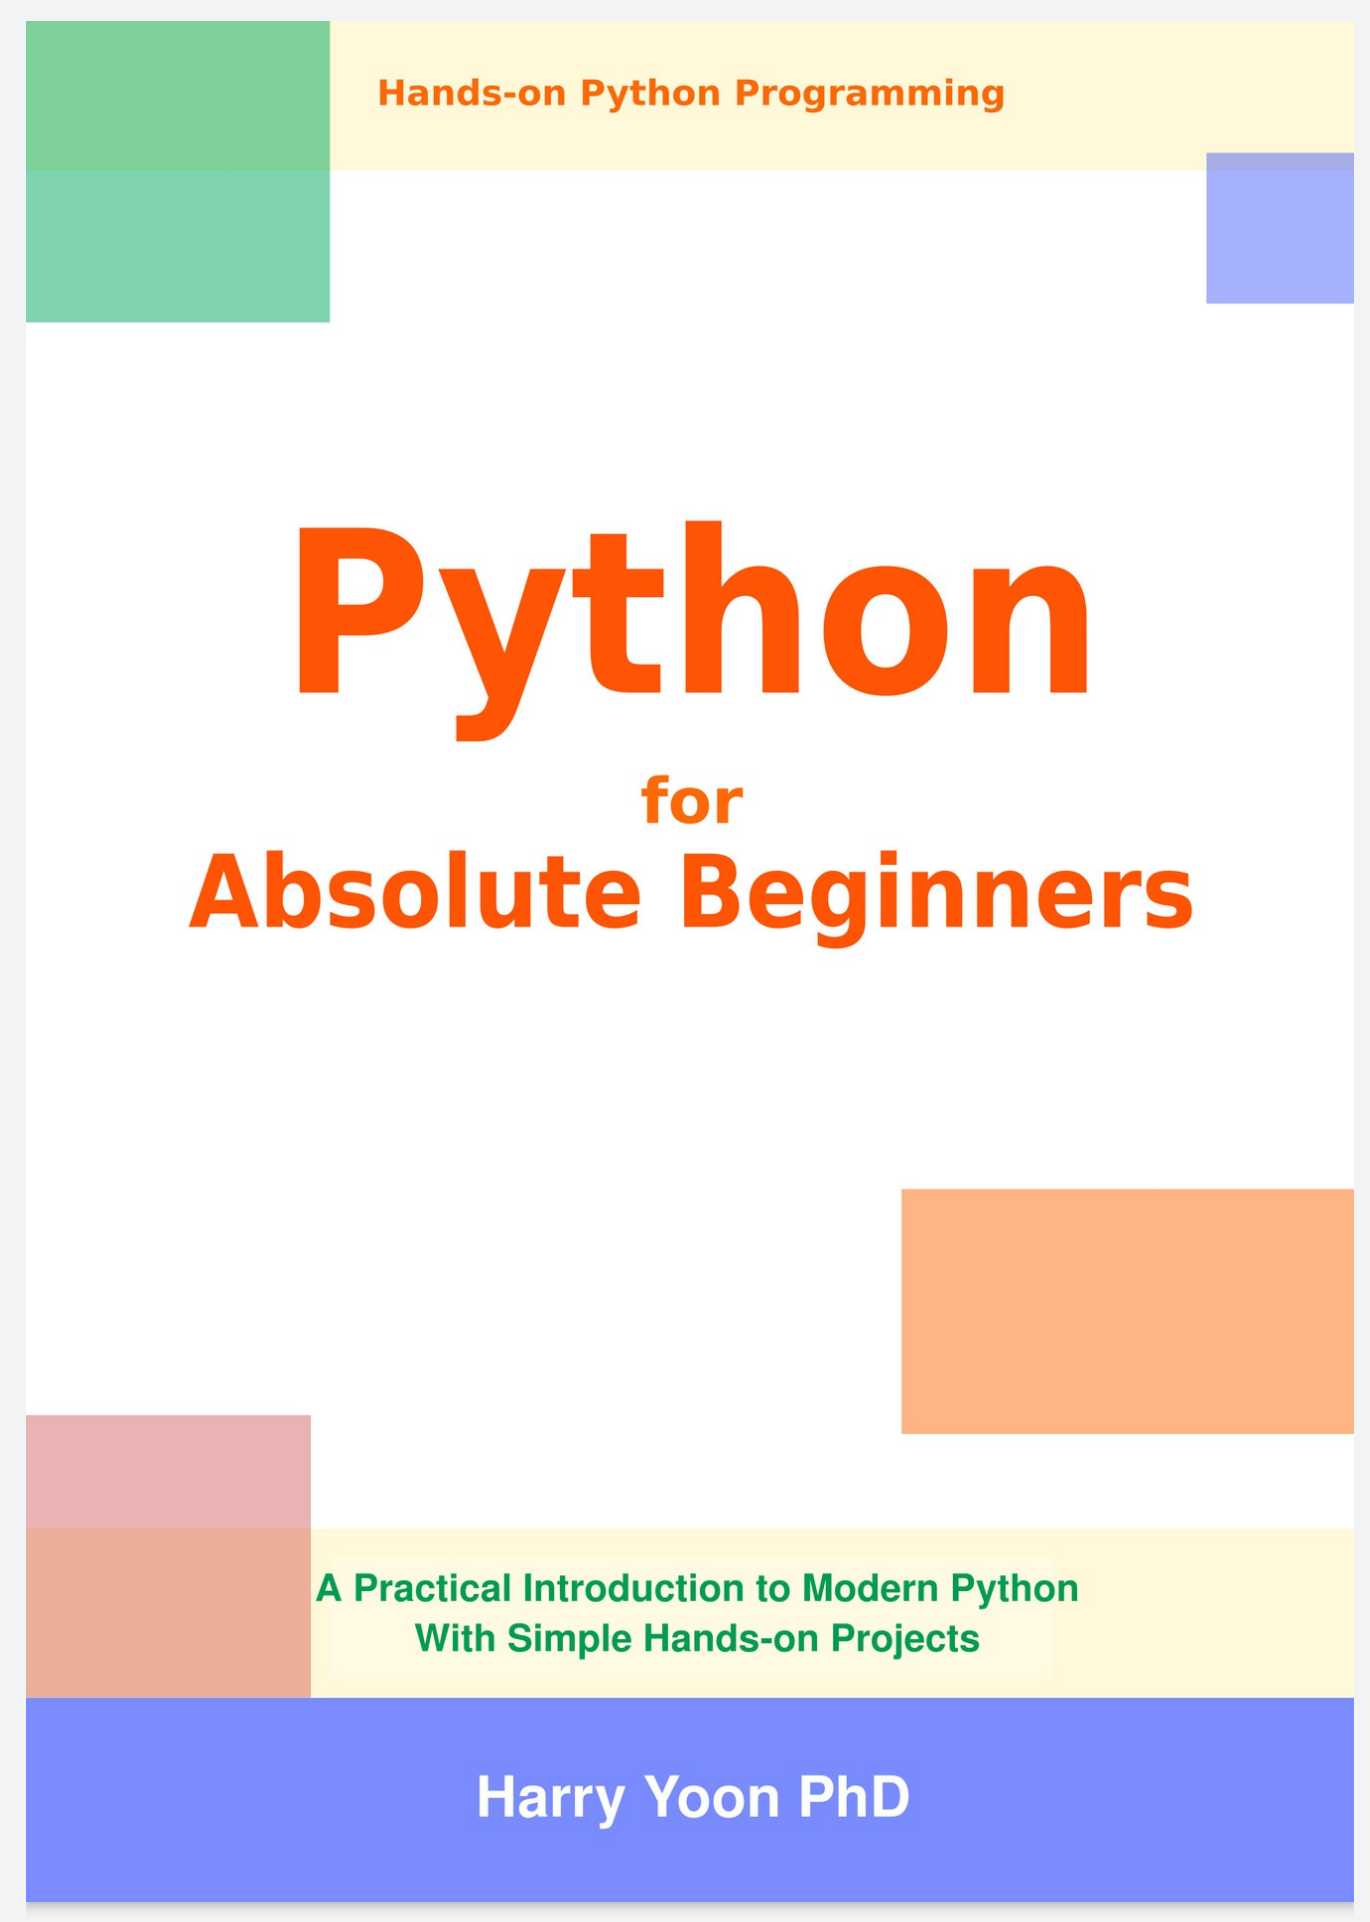 Python for Absolute Beginners: A Practical Introduction to Modern Python with Simple Hands-on Projects